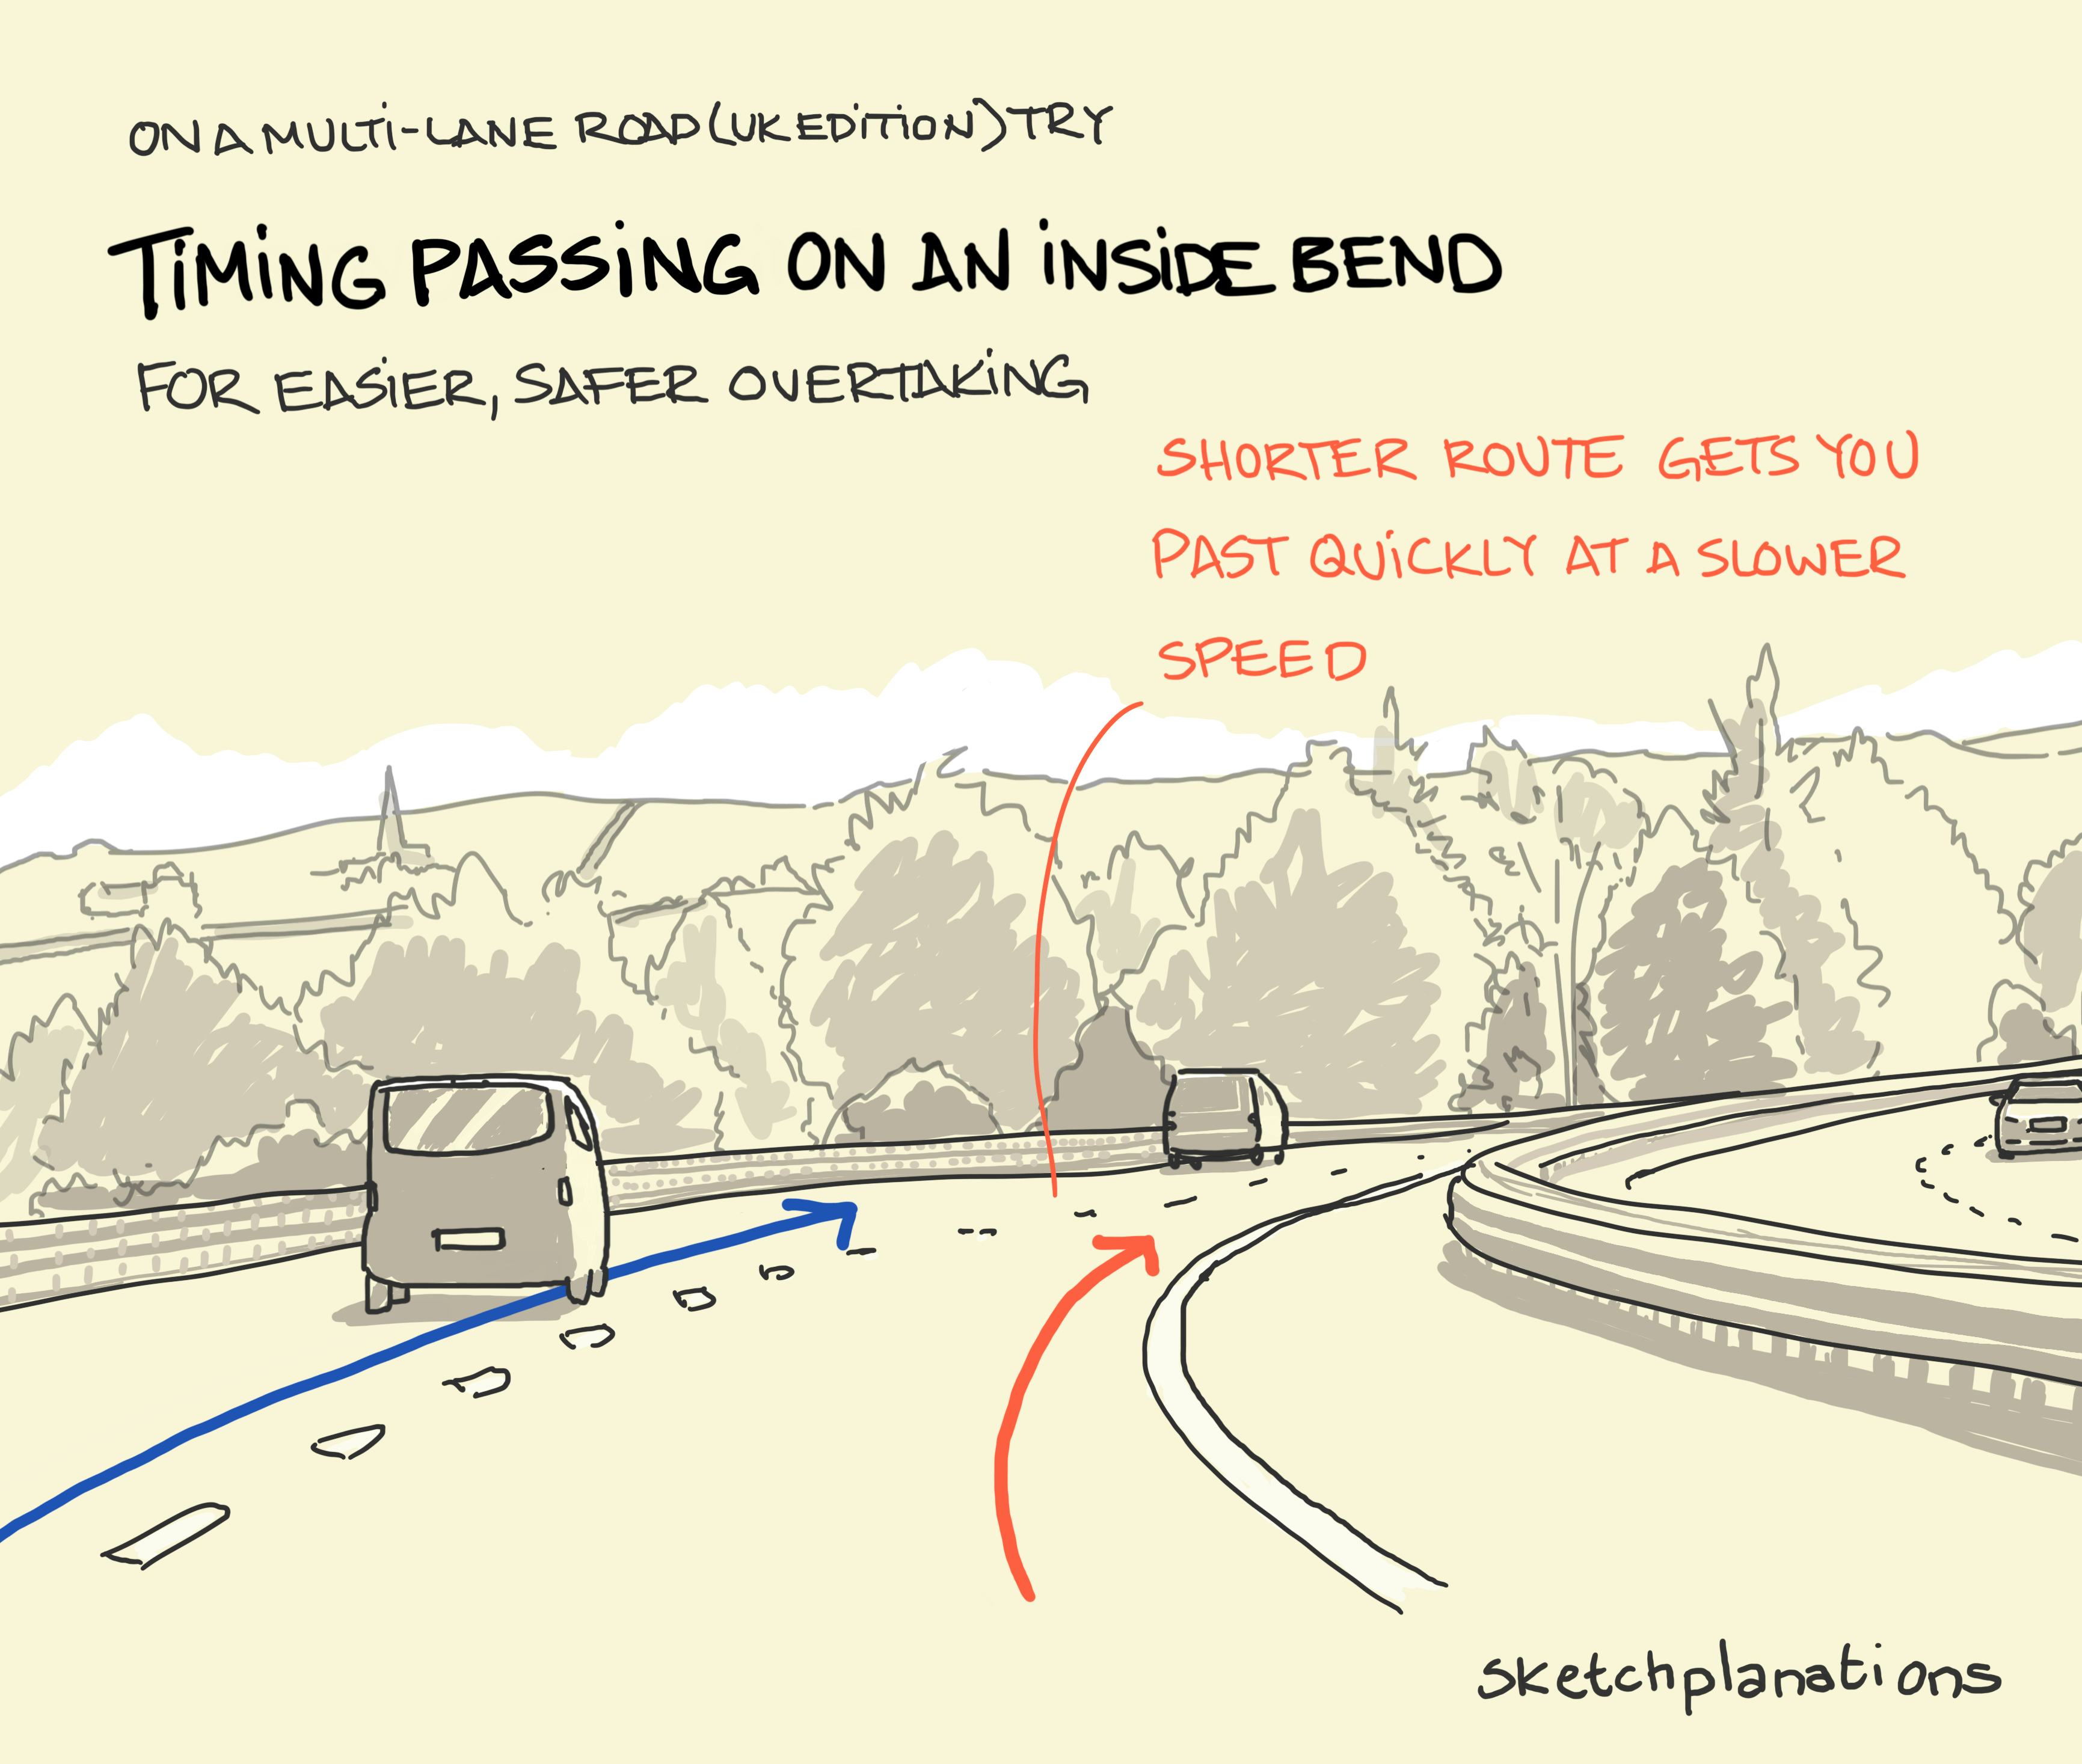 Passing on an inside bend - Sketchplanations